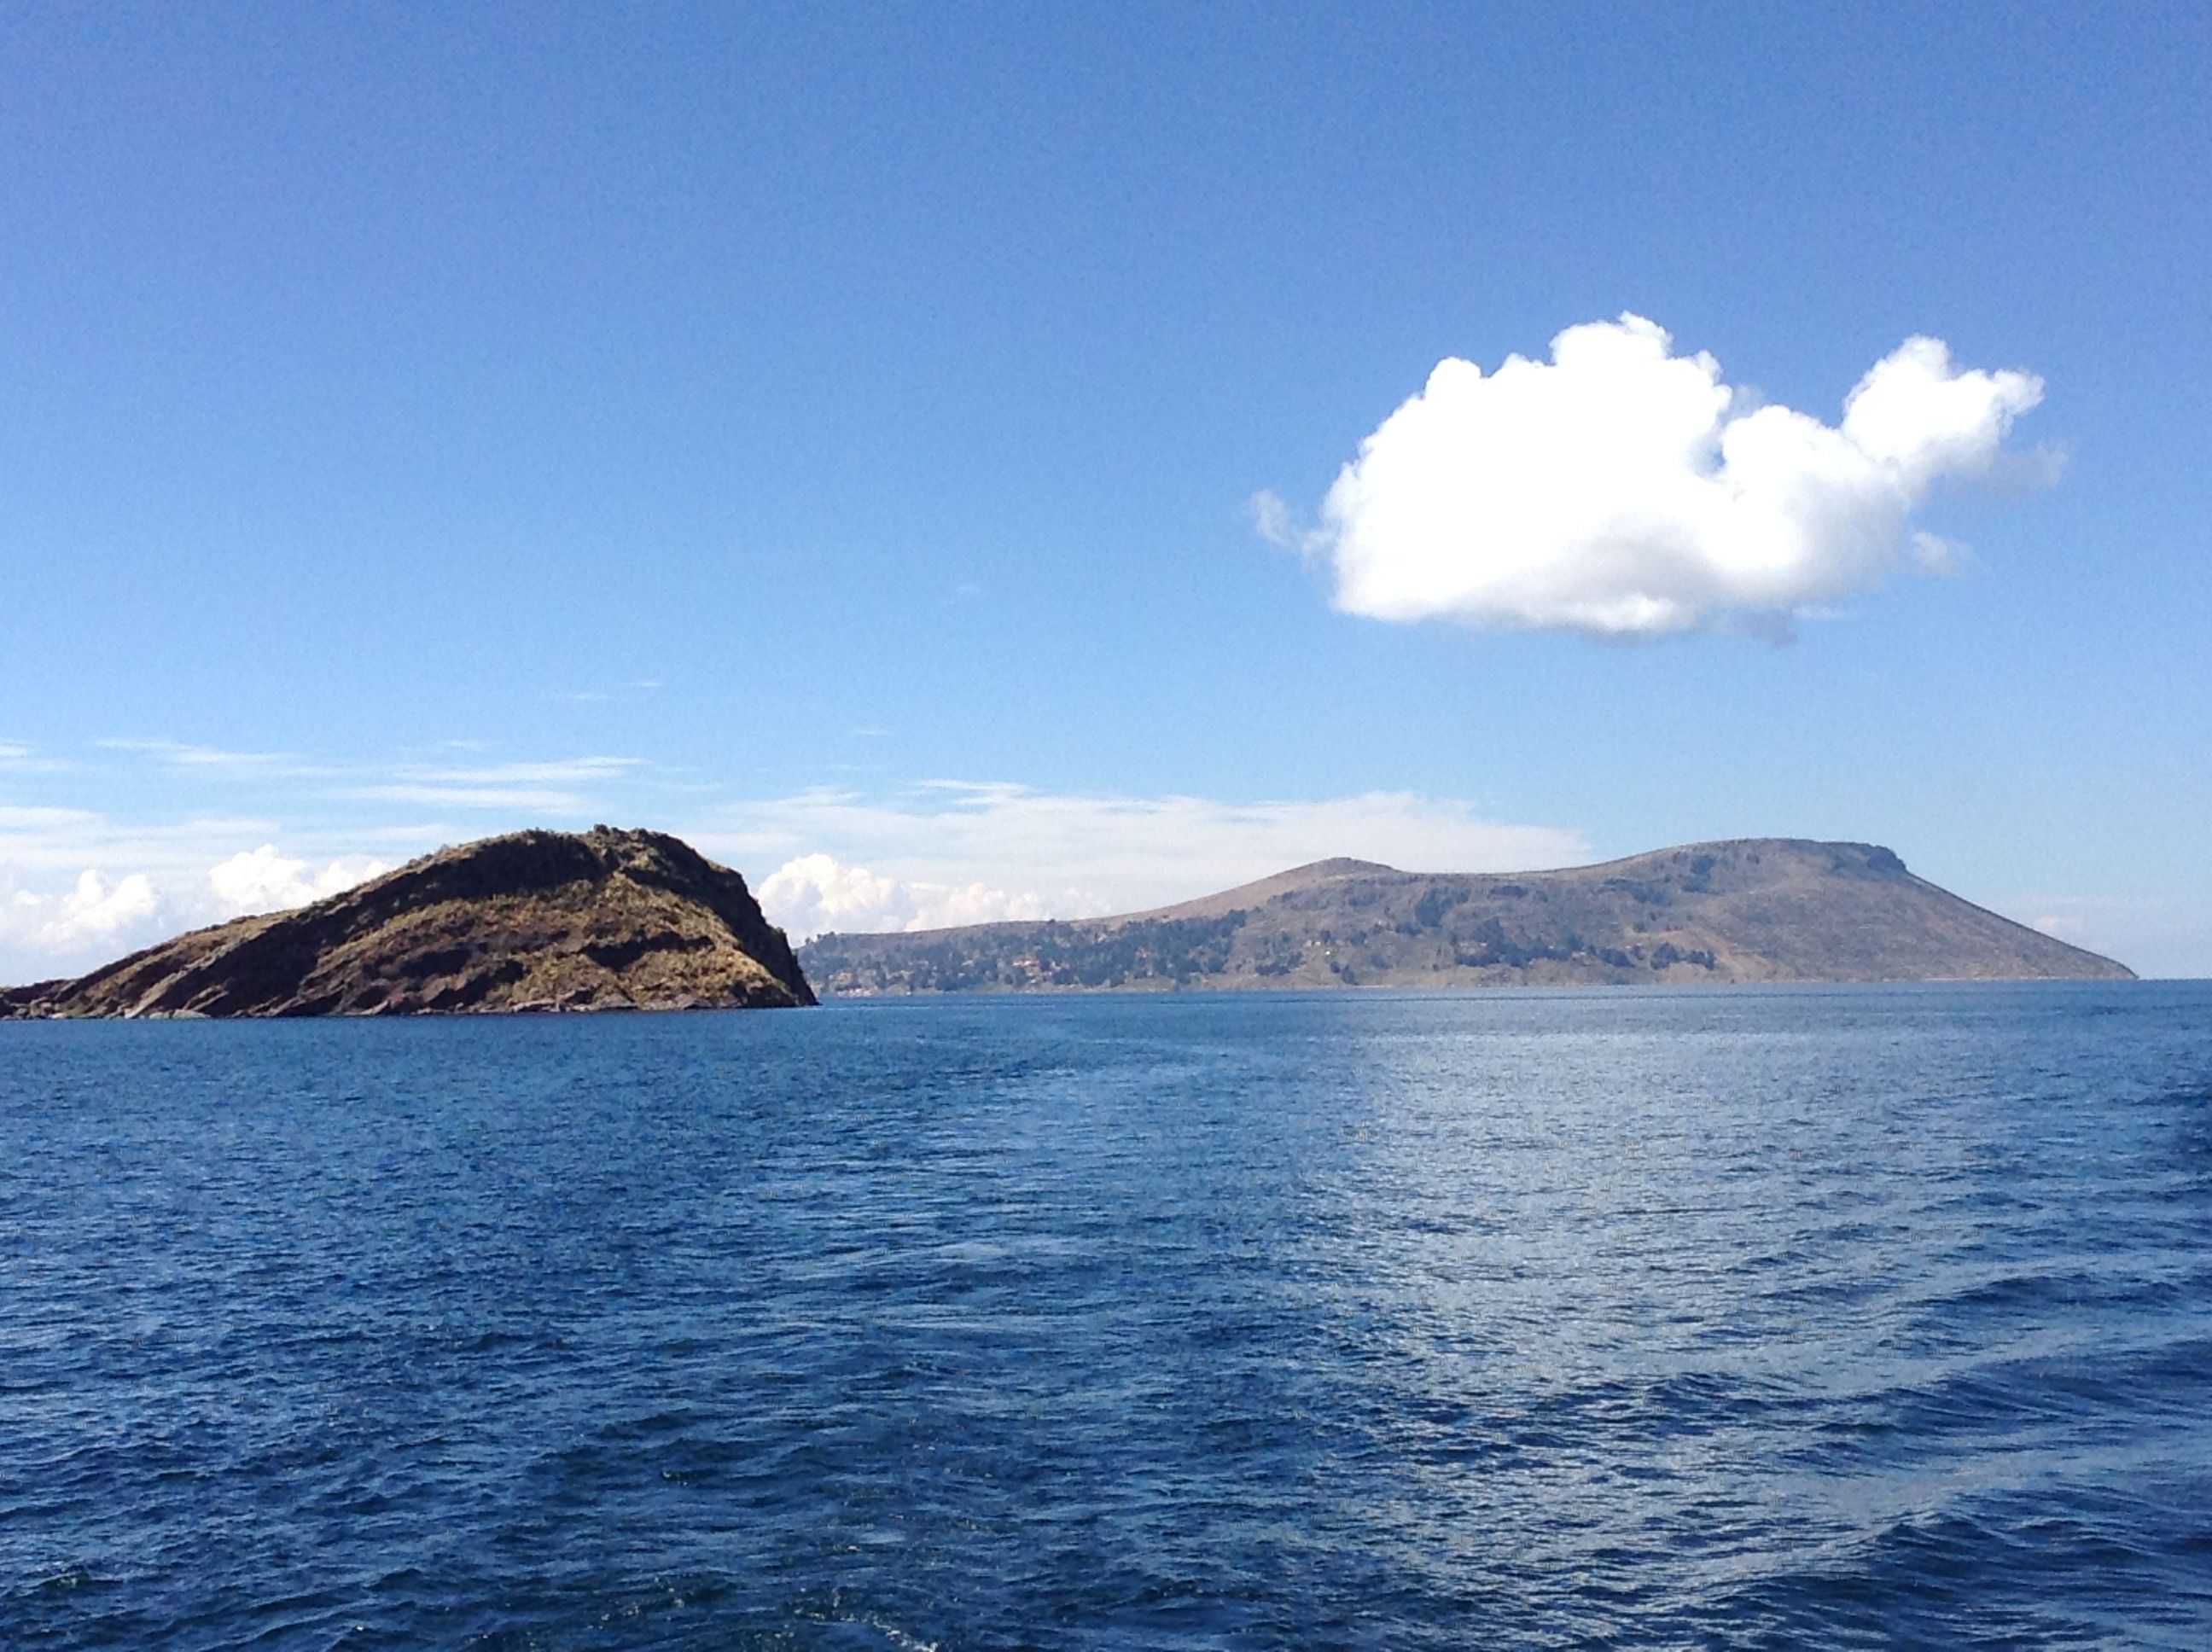 The creation myths of the Incas start at lake Titicaca